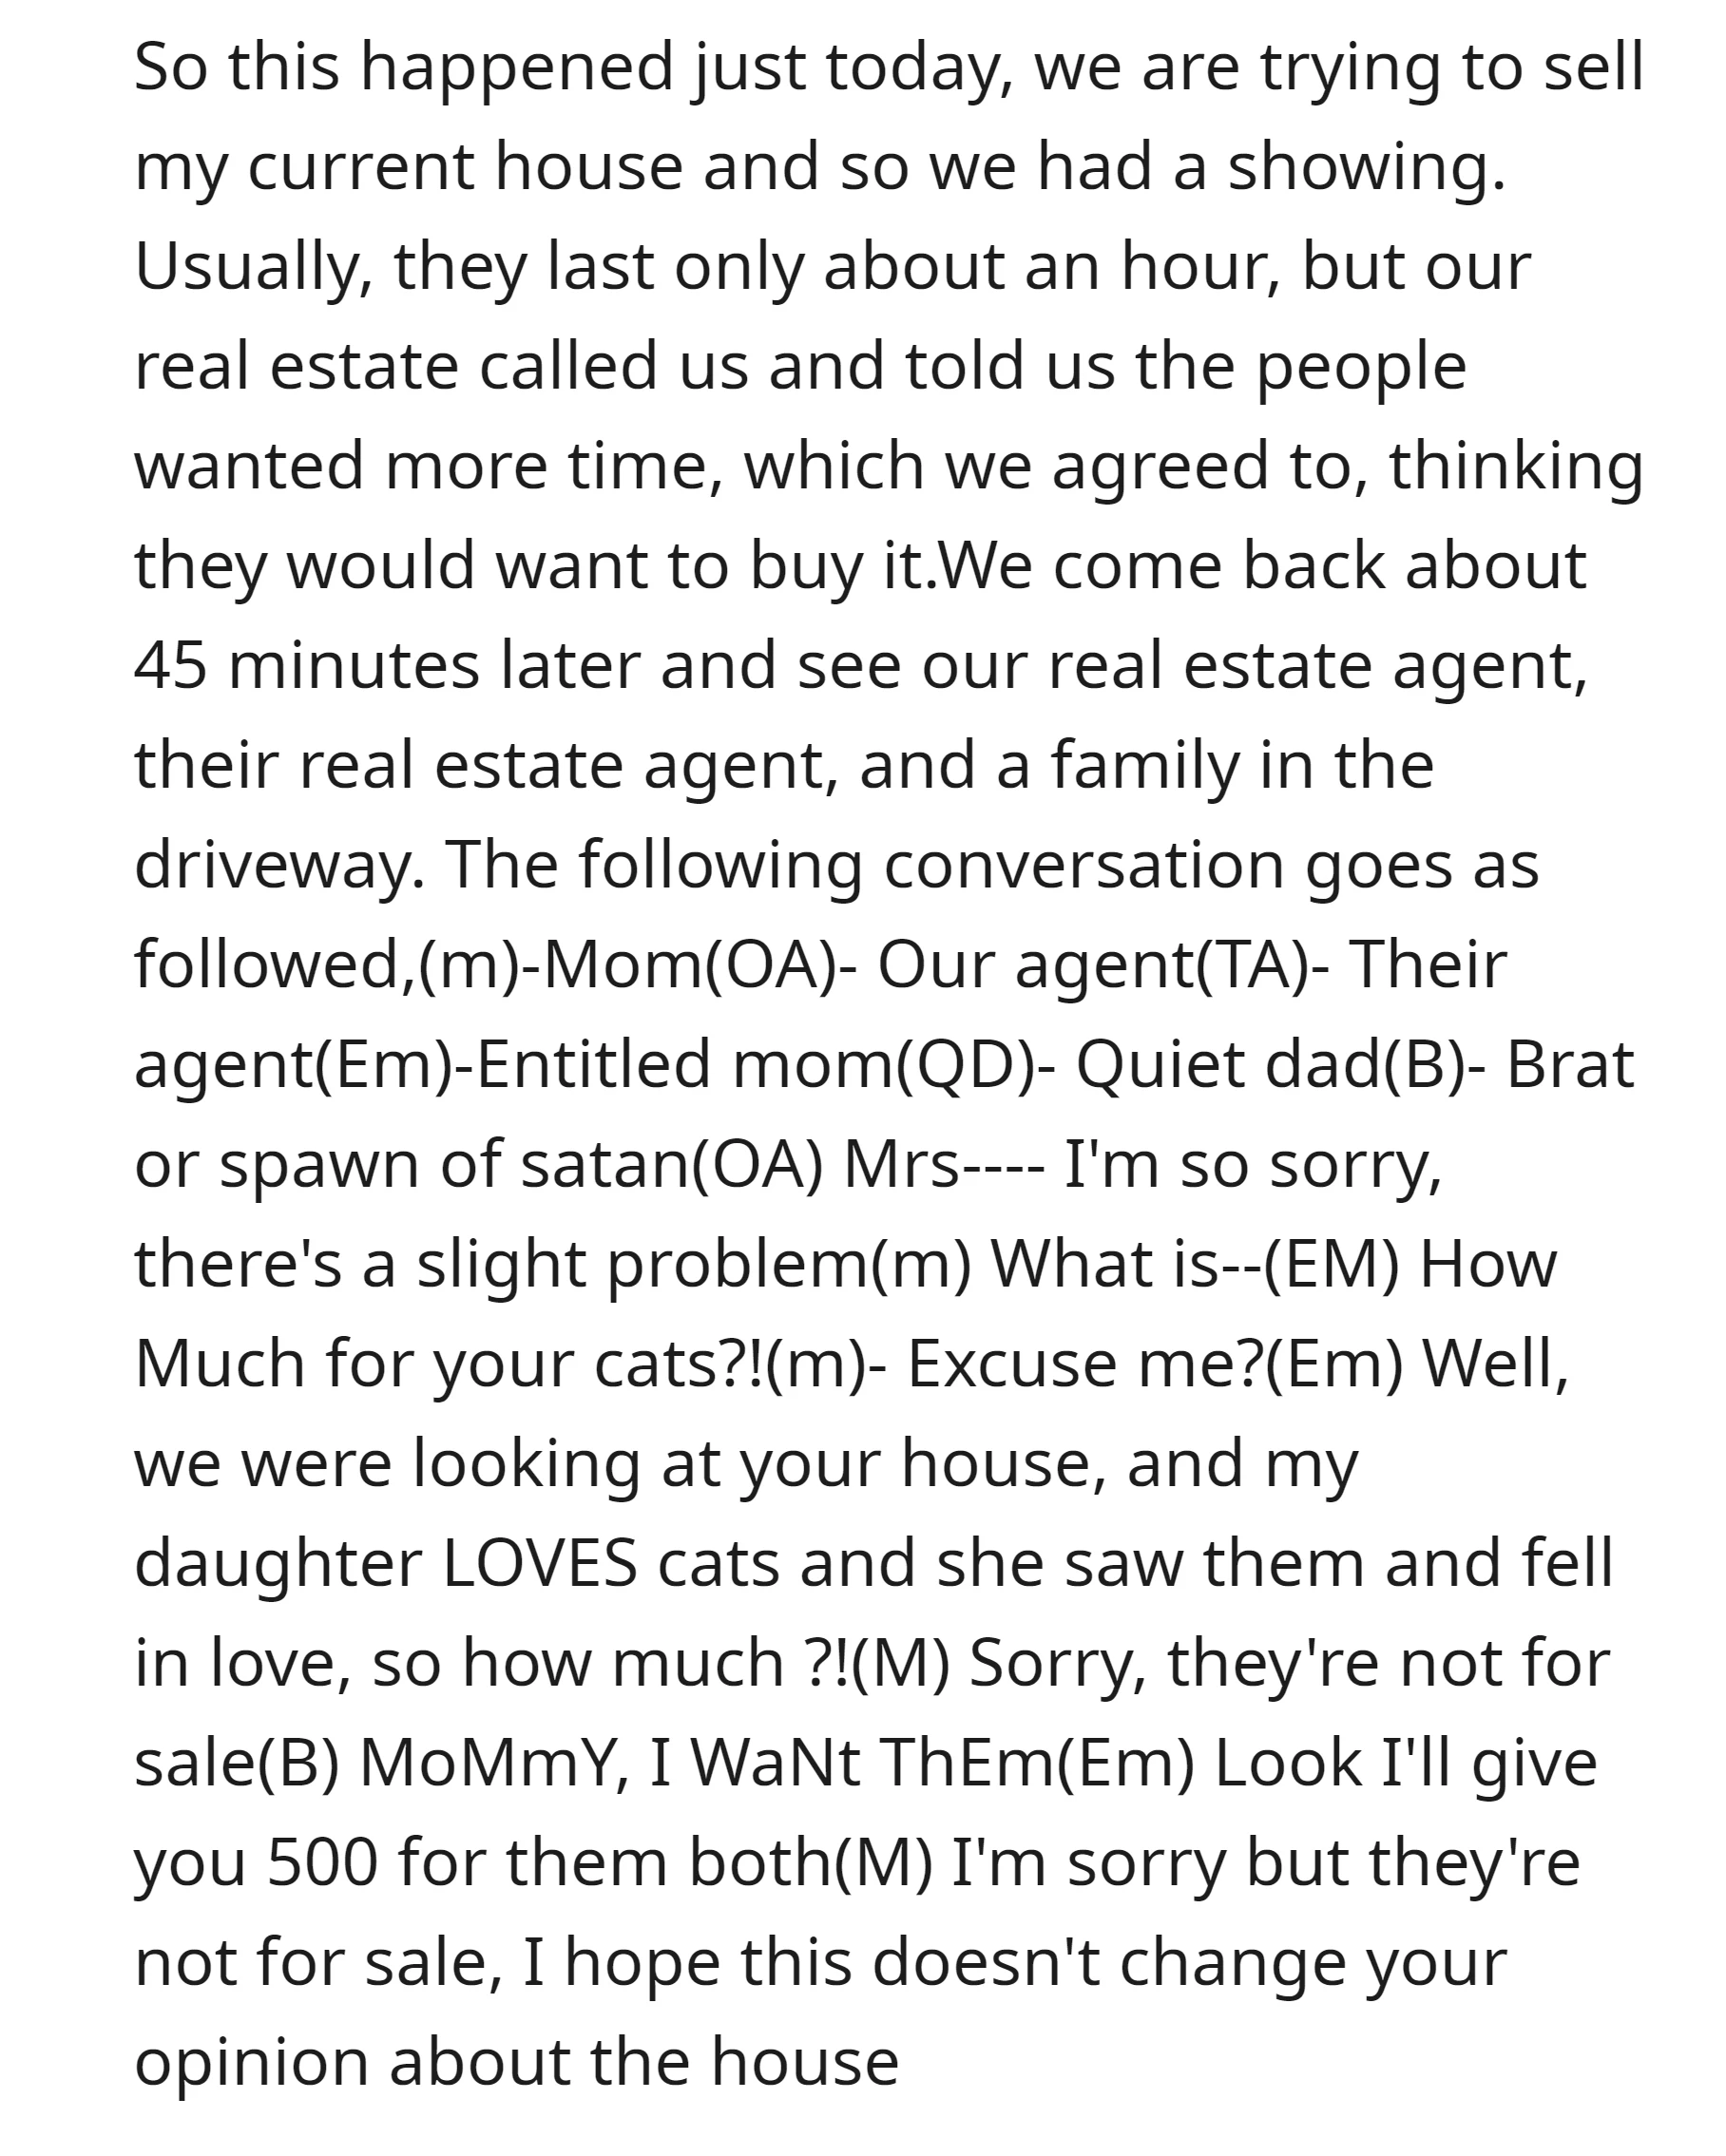 On the OP's real estate showing, an entitled mom offered to buy their cats, they refused because the cat was not for sale